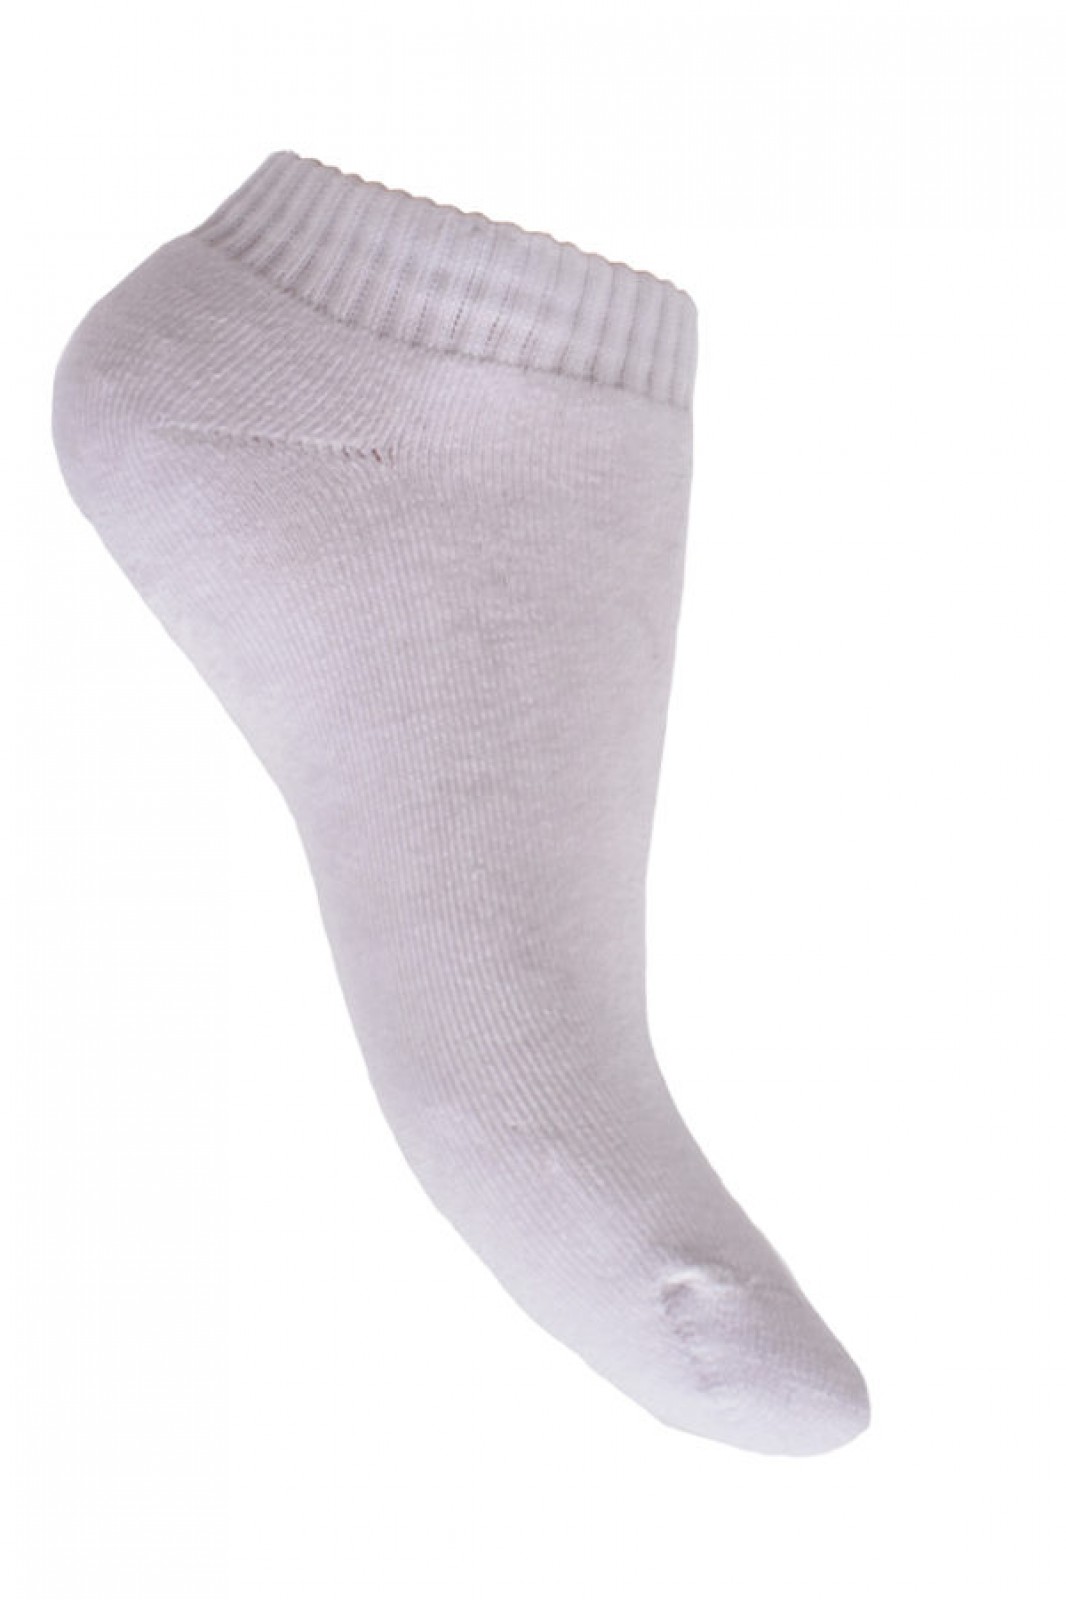 Unisex sports ankle socks in black and white